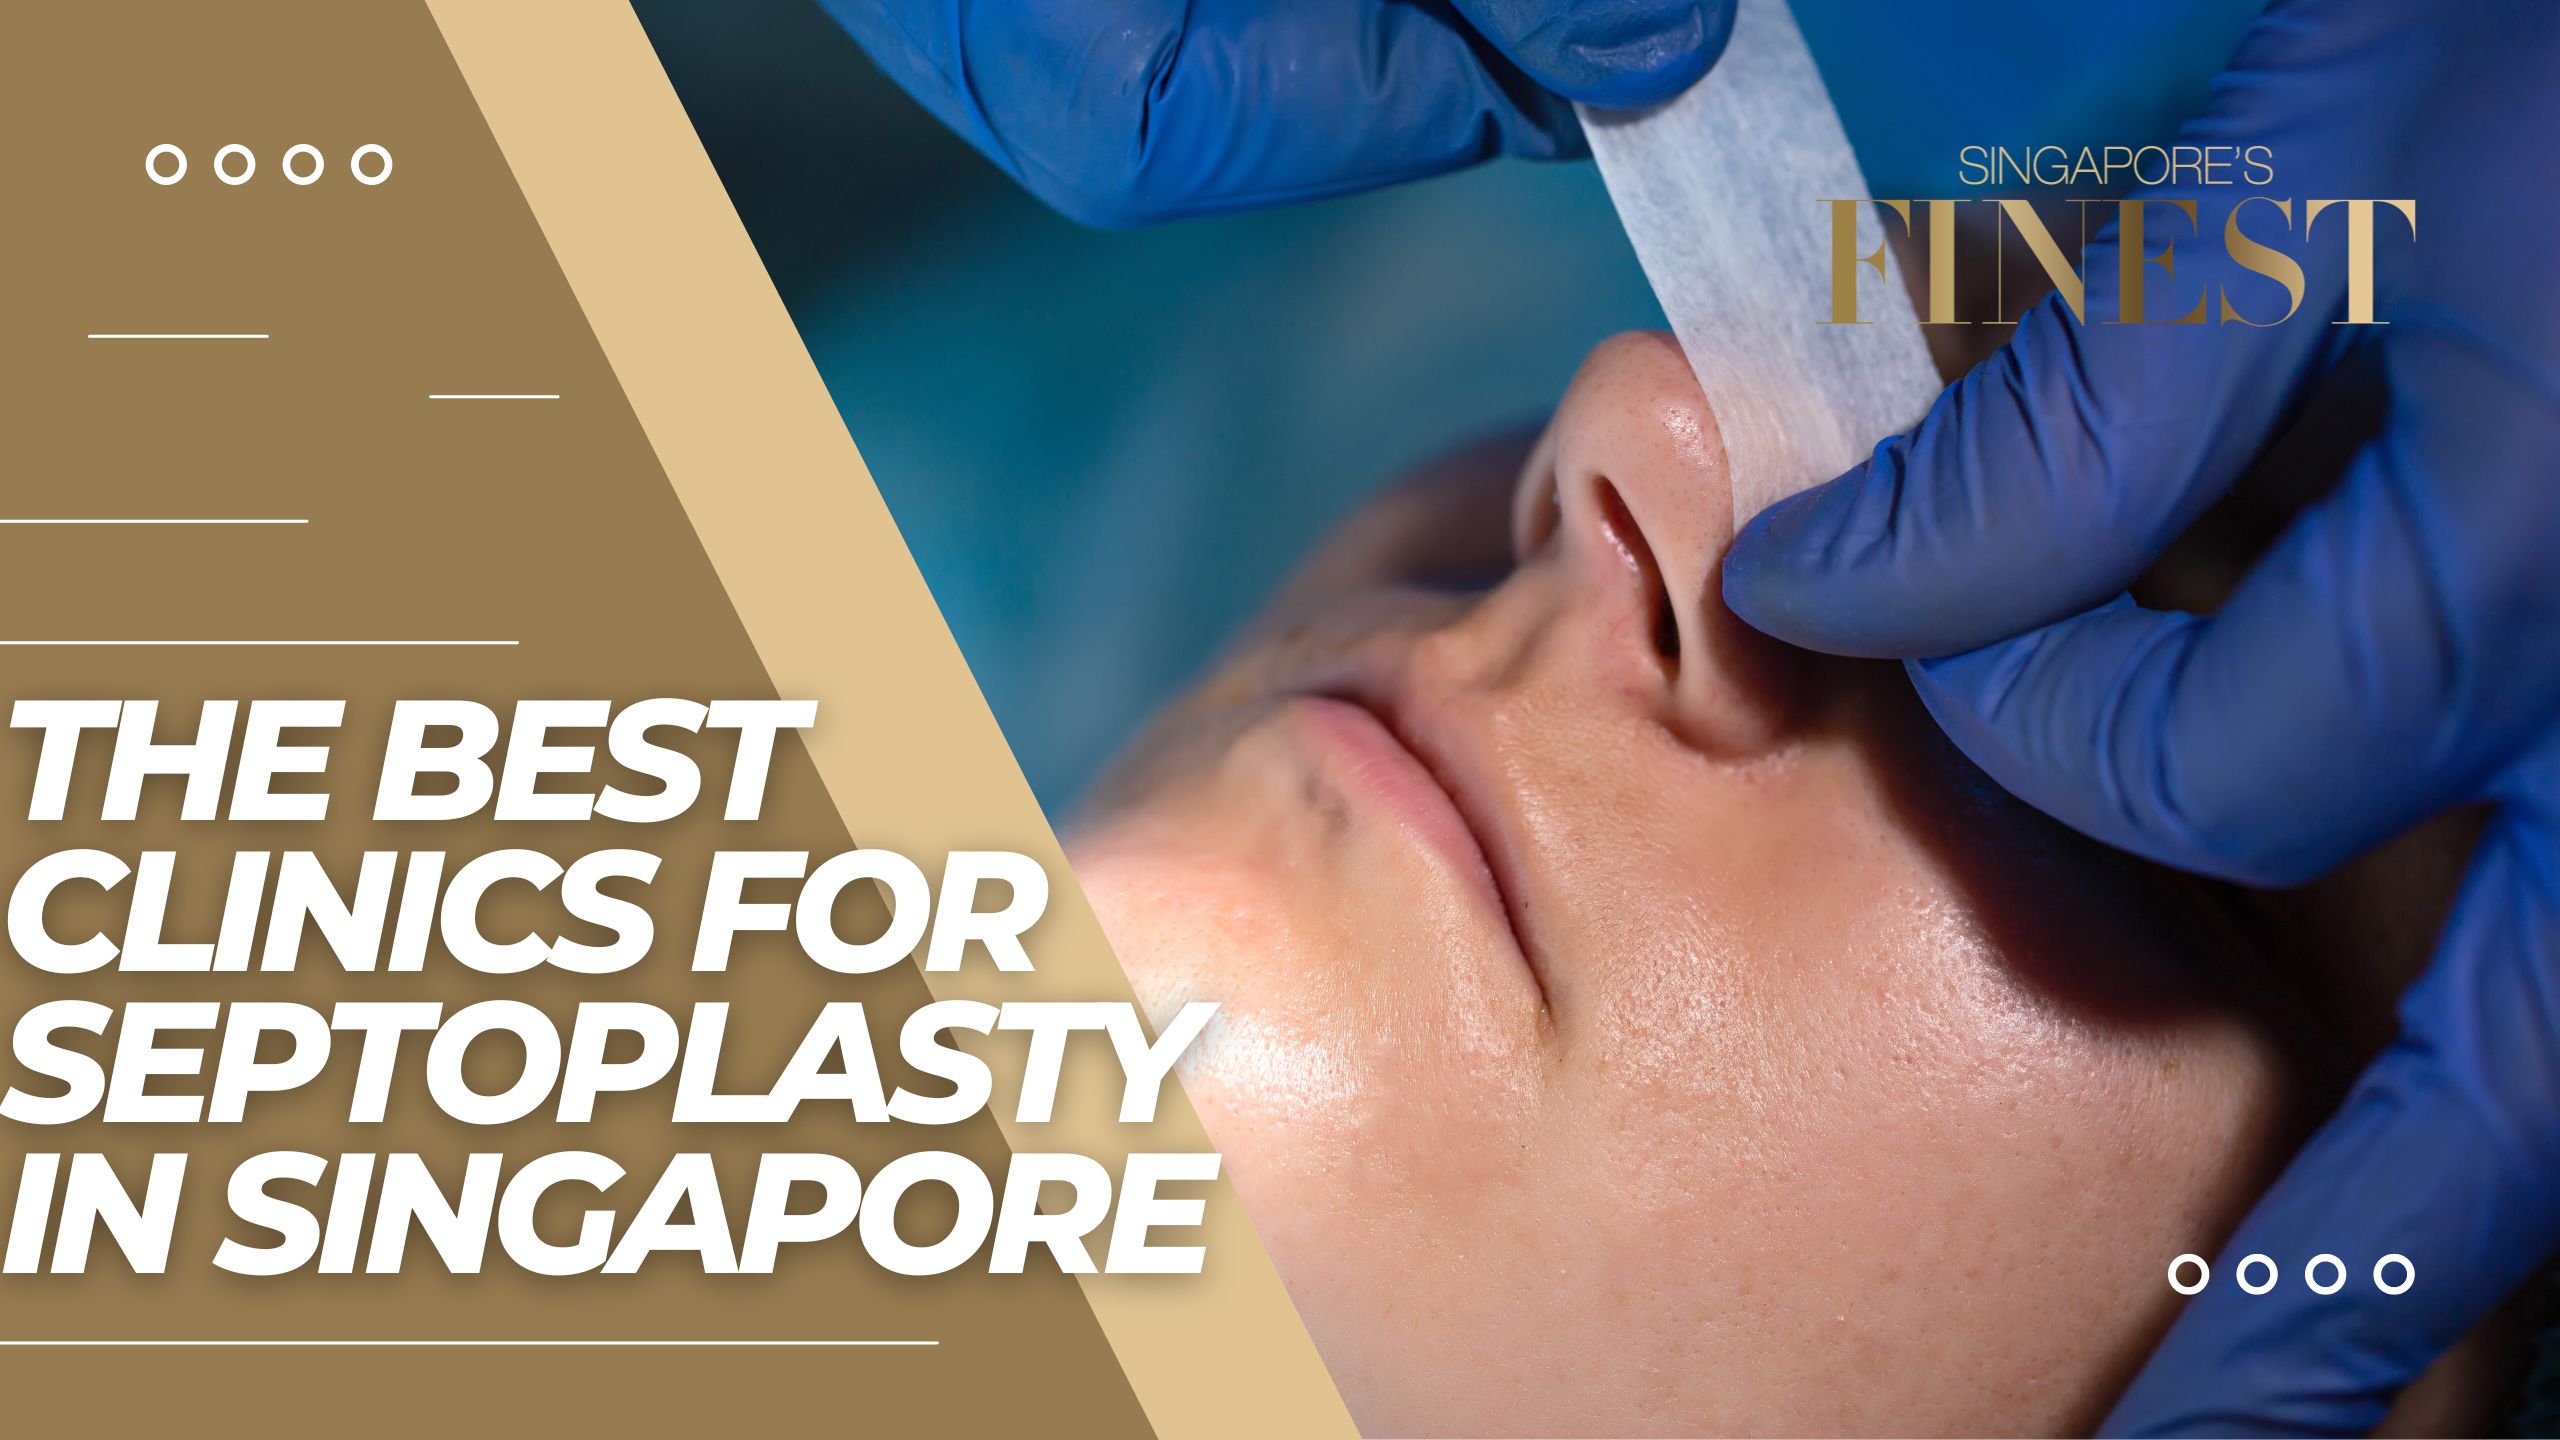 The Finest Clinics For Septoplasty in Singapore